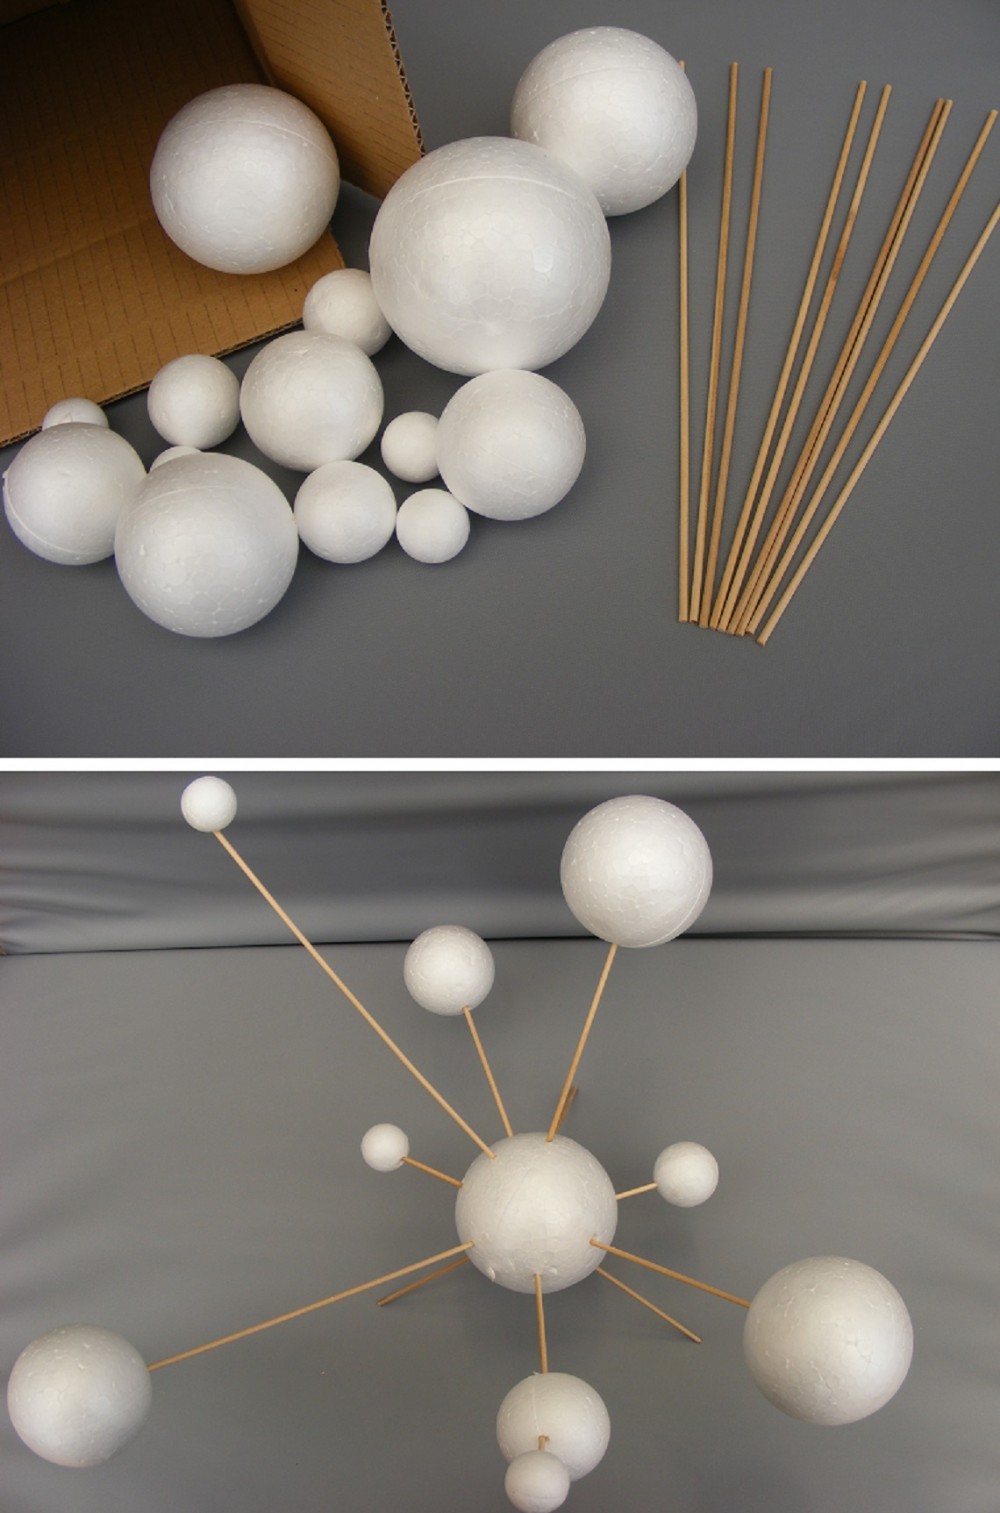 Pllieay Make Your Own Solar System Model with 14 Mixed Sized Polystyrene Spheres 